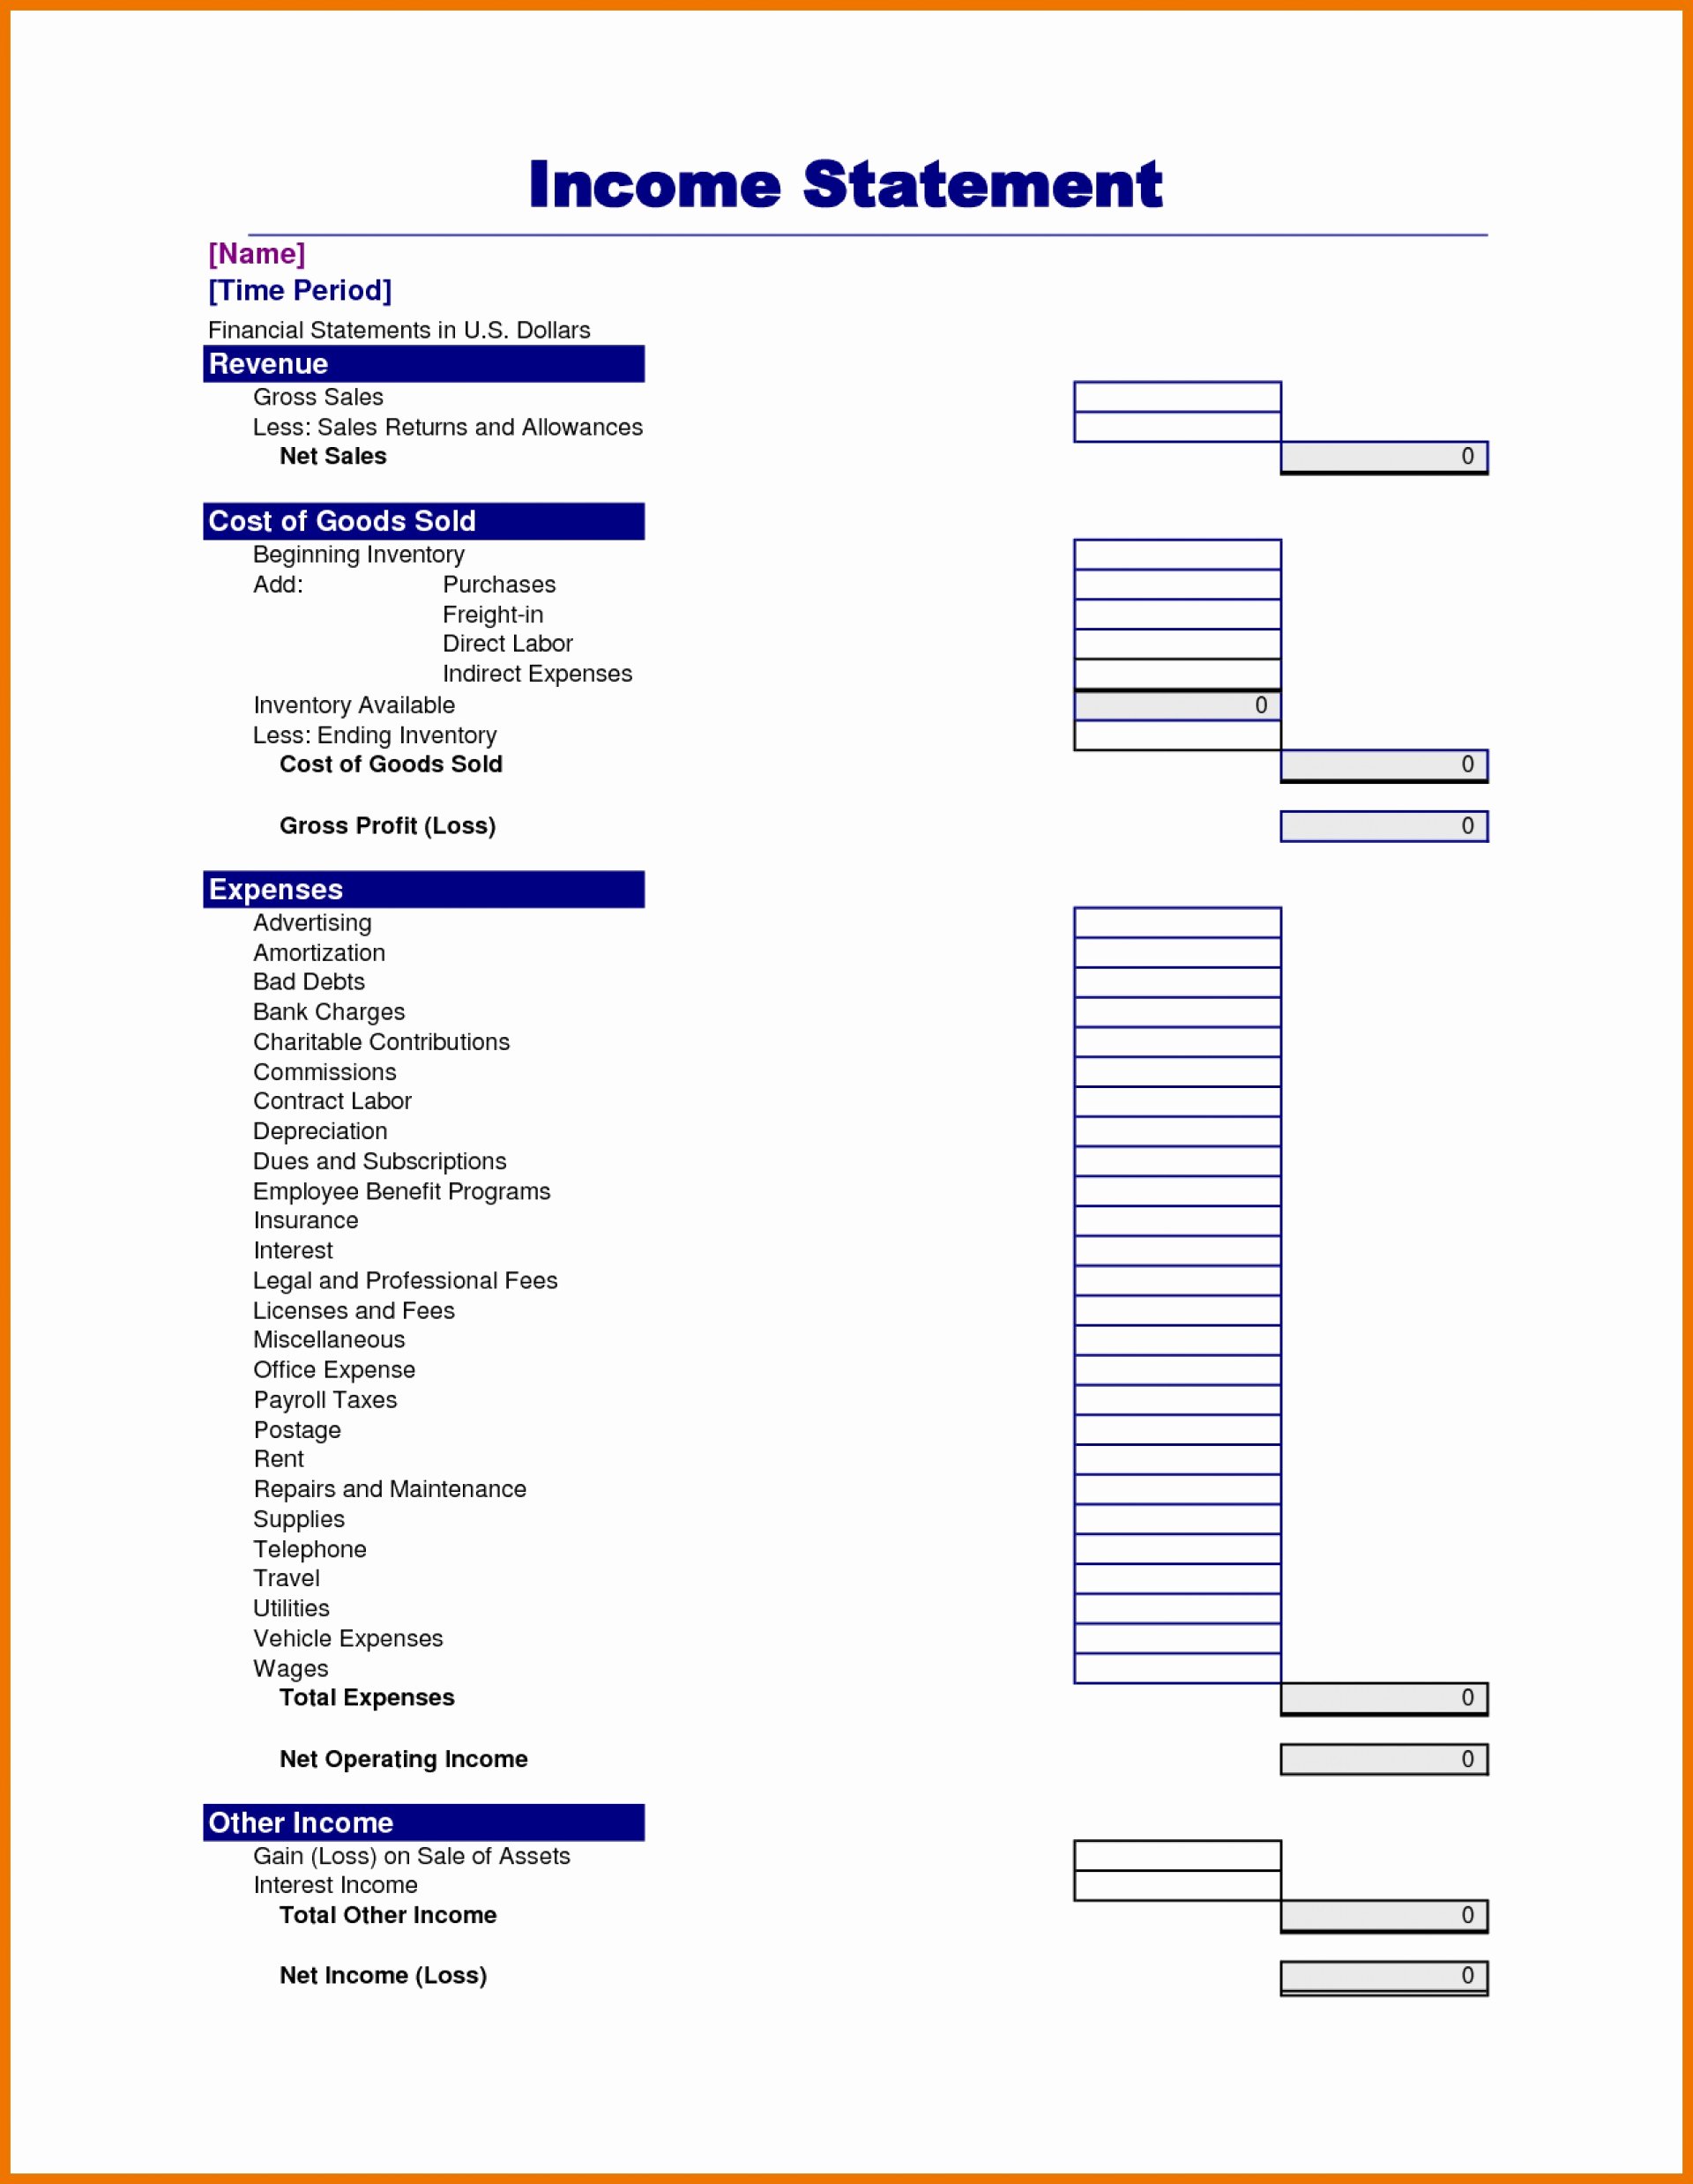 Basic Income Statement Template Lovely Basic In E Statement Template Excel Spreadsheet